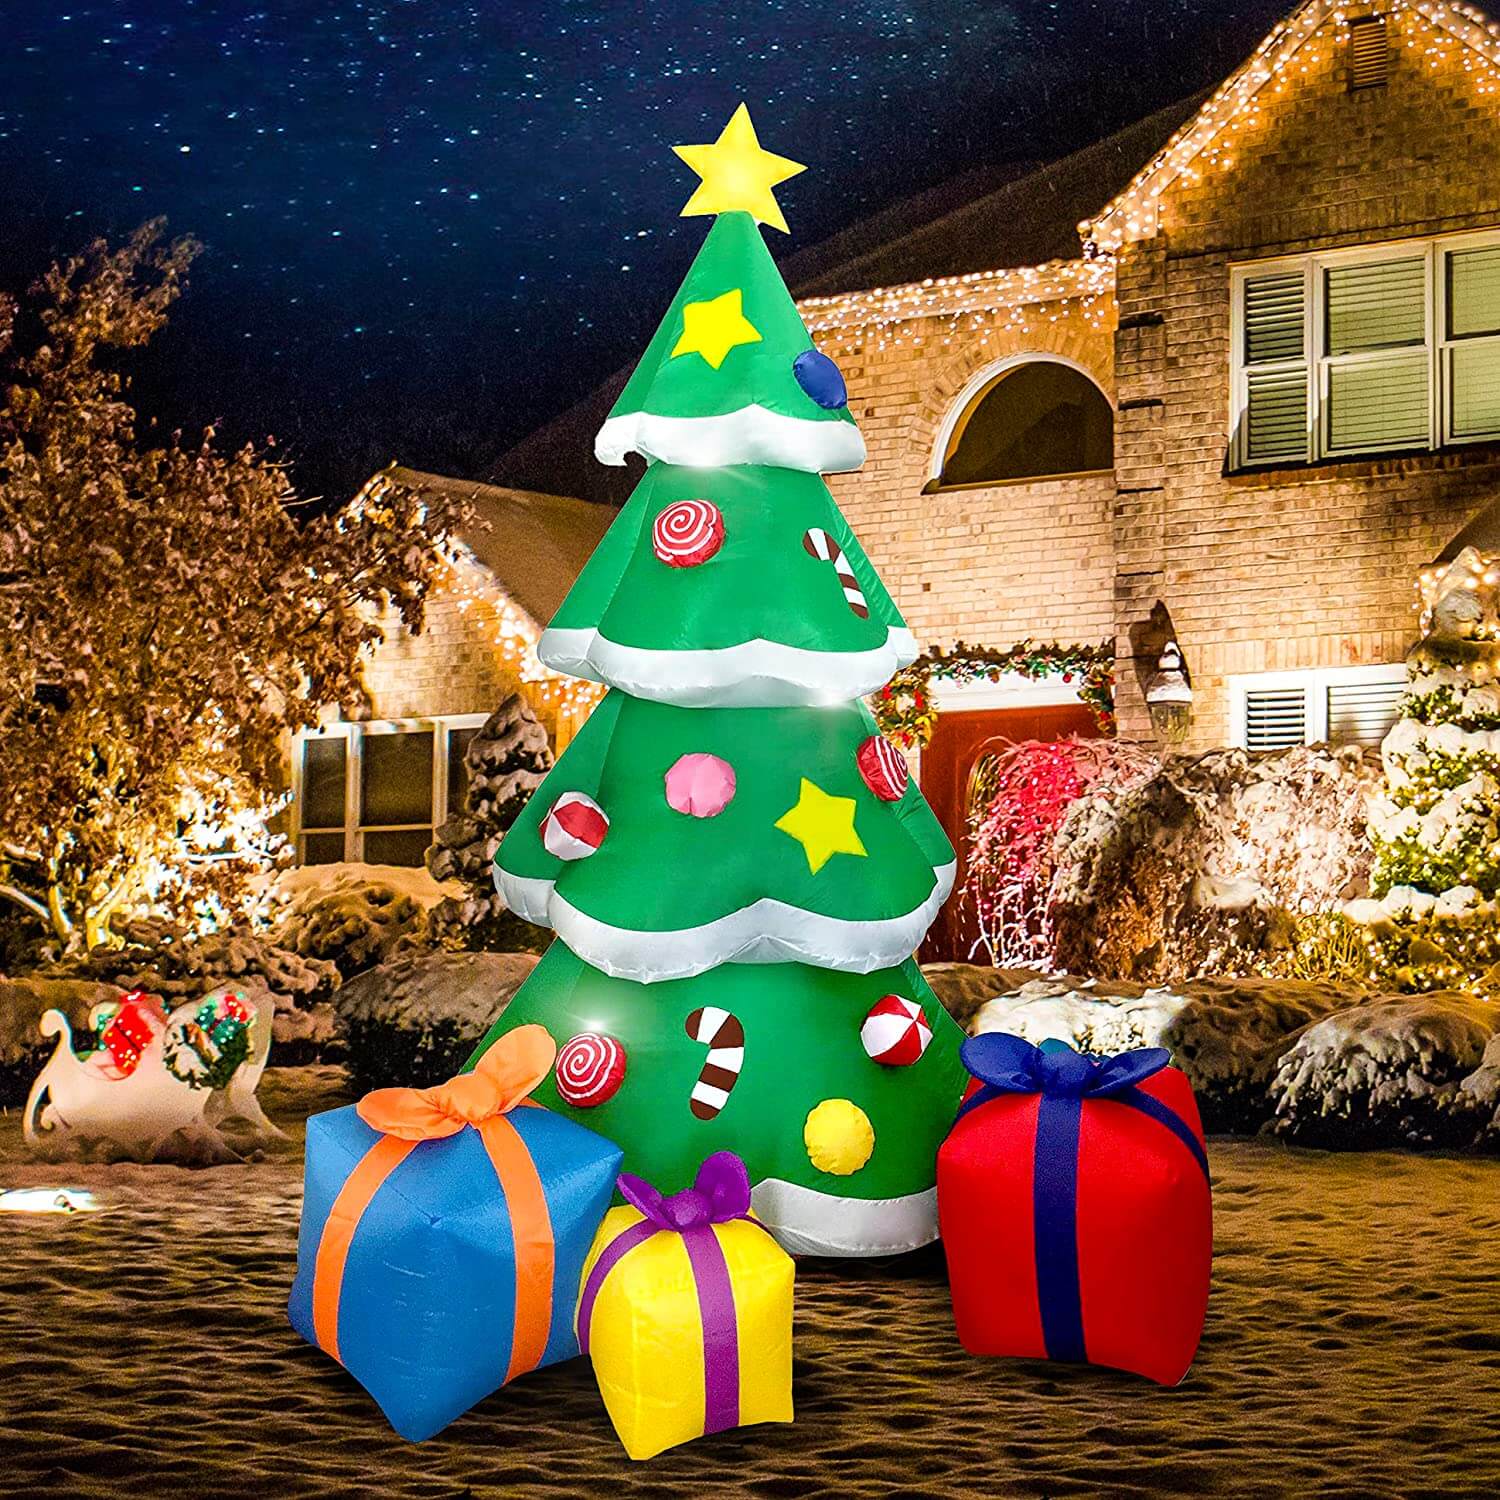 Best Inflatable Christmas Tree for Maximum Festive Fun!